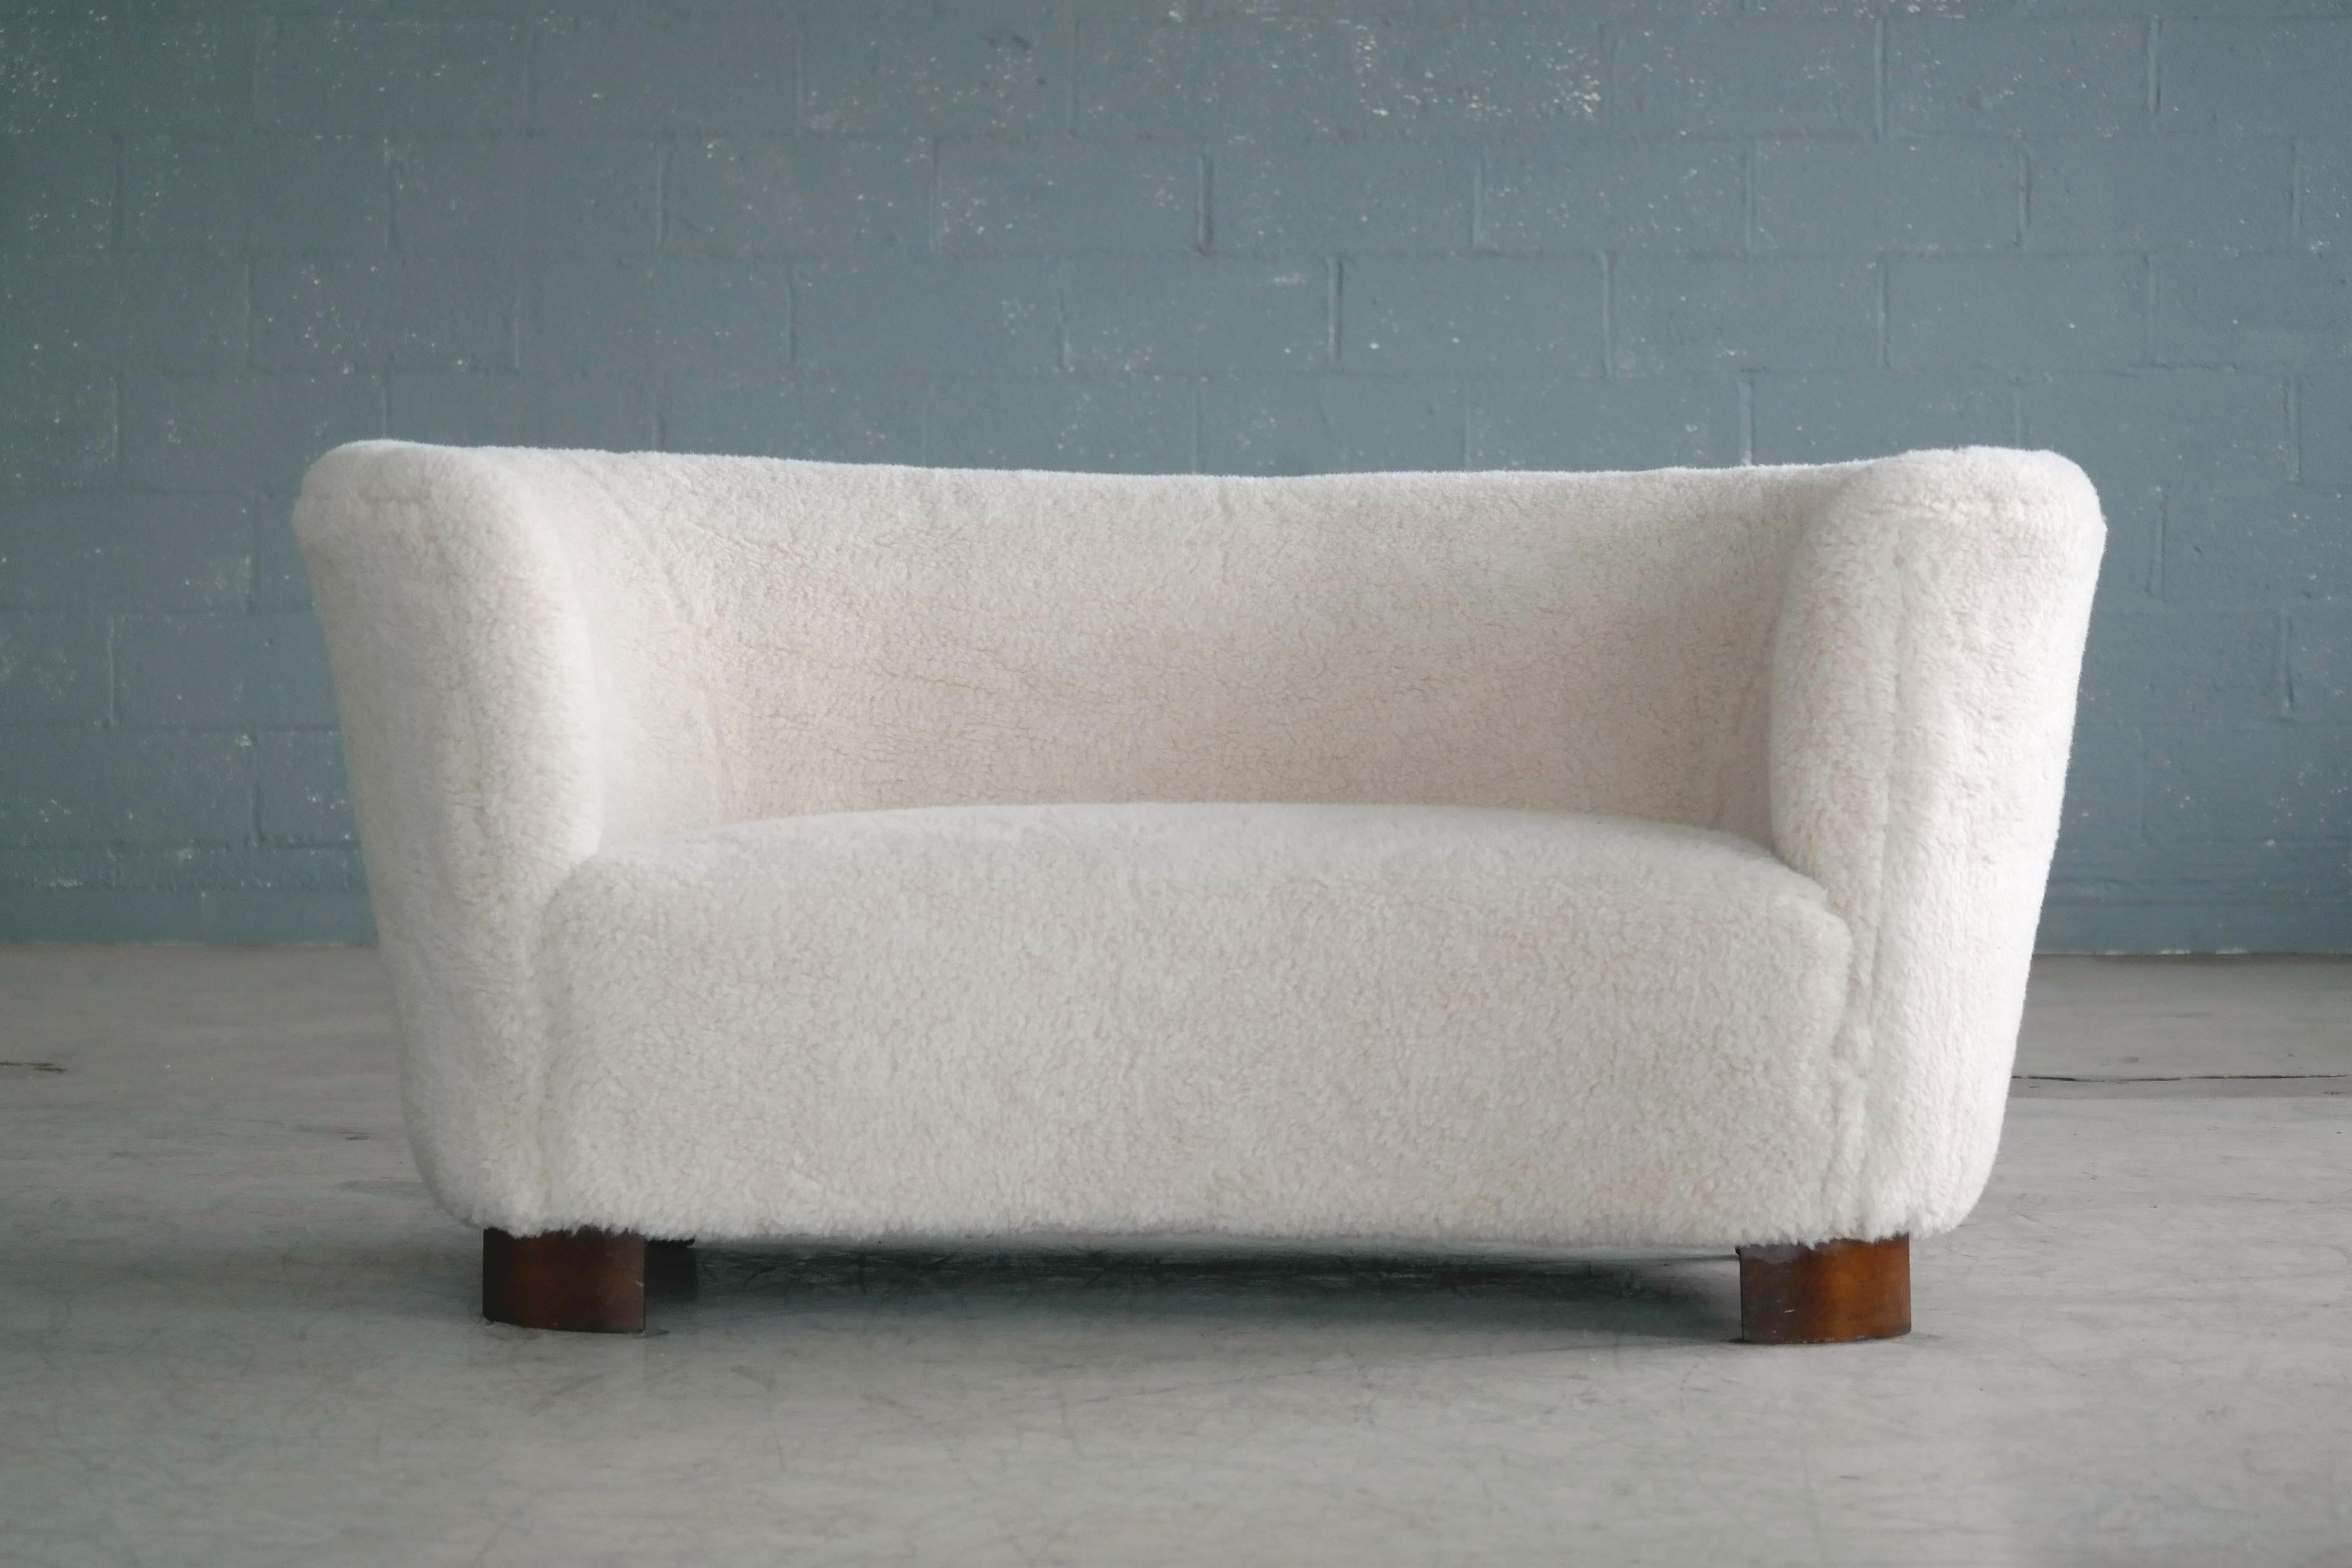 Viggo Boesen style curved two-seat sofa or loveseat attributed to Slagelse Møbelværk and Designer Viggo Boesen made in Denmark, circa 1940. This sofa will make a strong statement in any room. Beautiful round lines and iconic block feet typical of